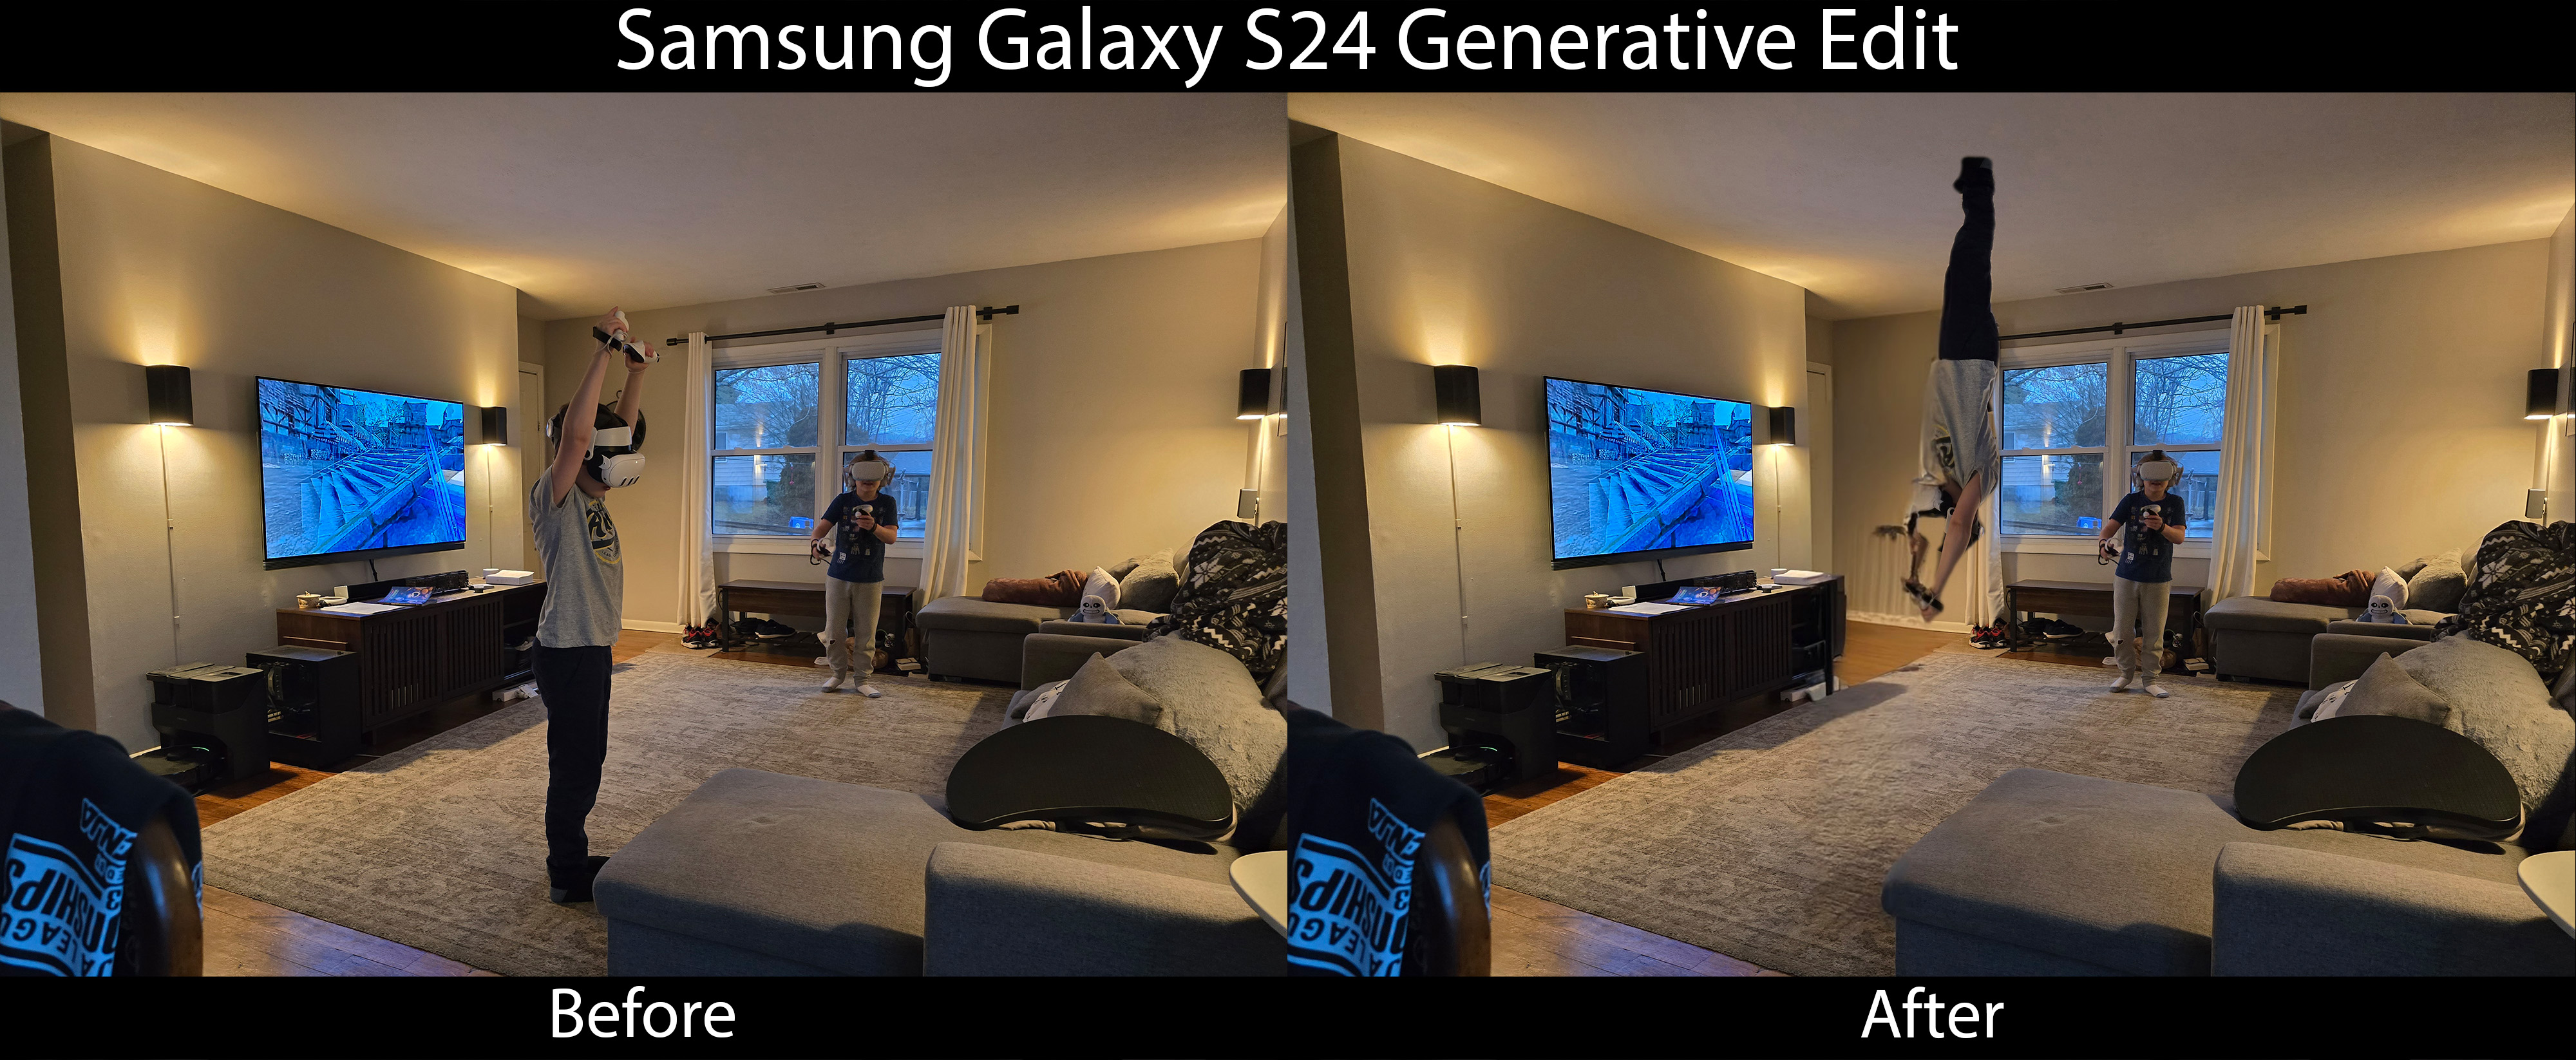 Using the new Generative Edit feature on the Samsung Galaxy S24 Ultra